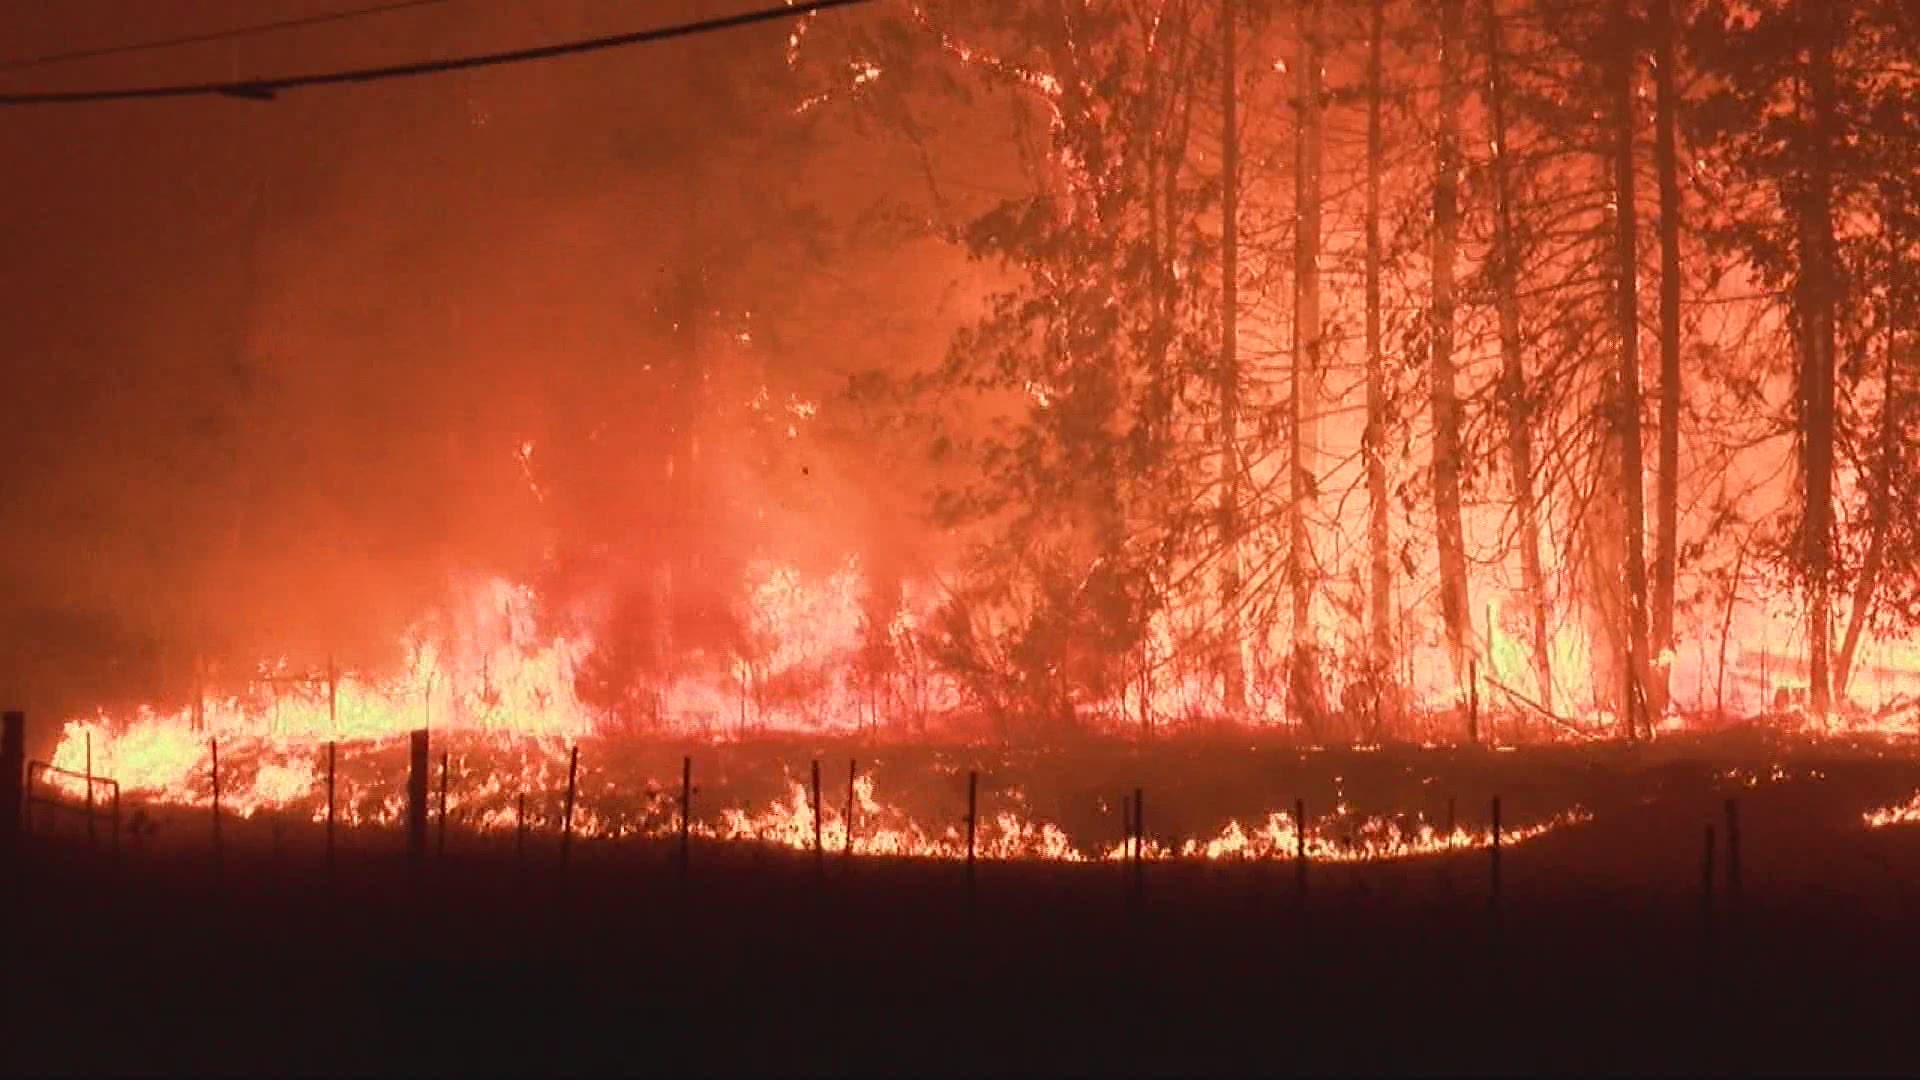 Ahead of the 2021 wildfire season, Oregon's Public Utility Commission has approved temporary power shutoffs to prevent wildfires.